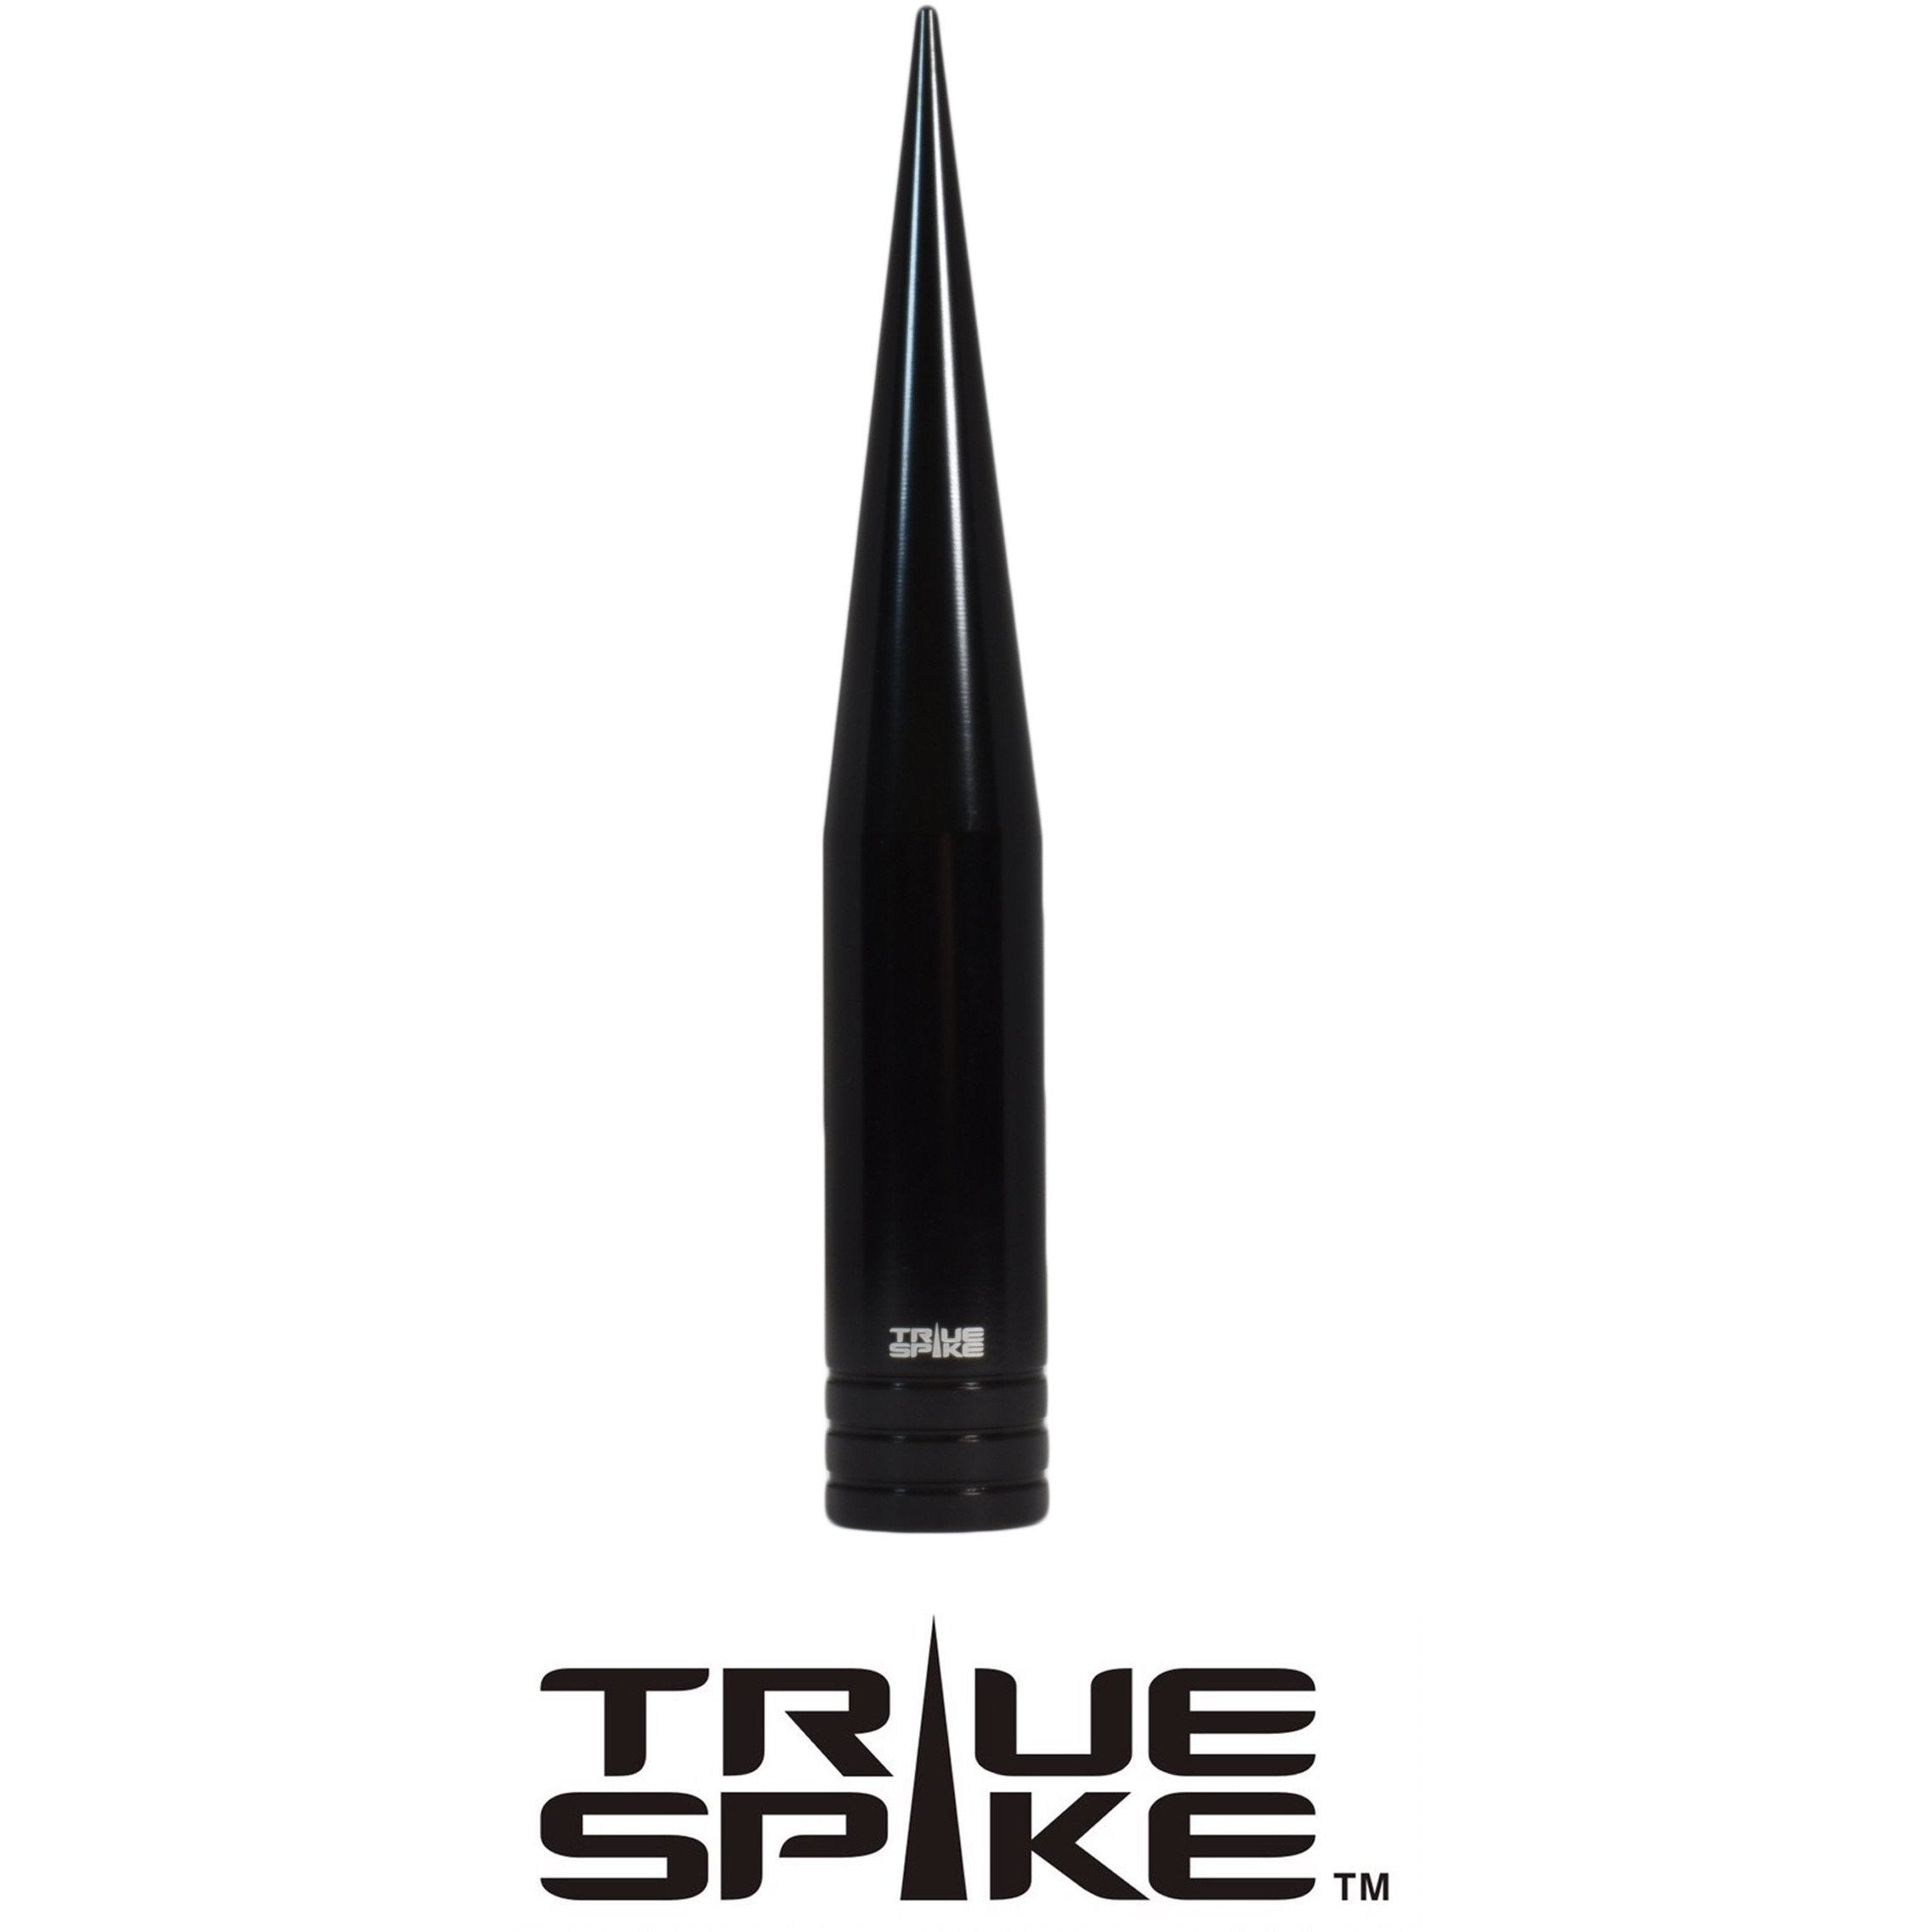 TRUE SPIKE 136mm Antenna SA040 - Tires and Engine Performance